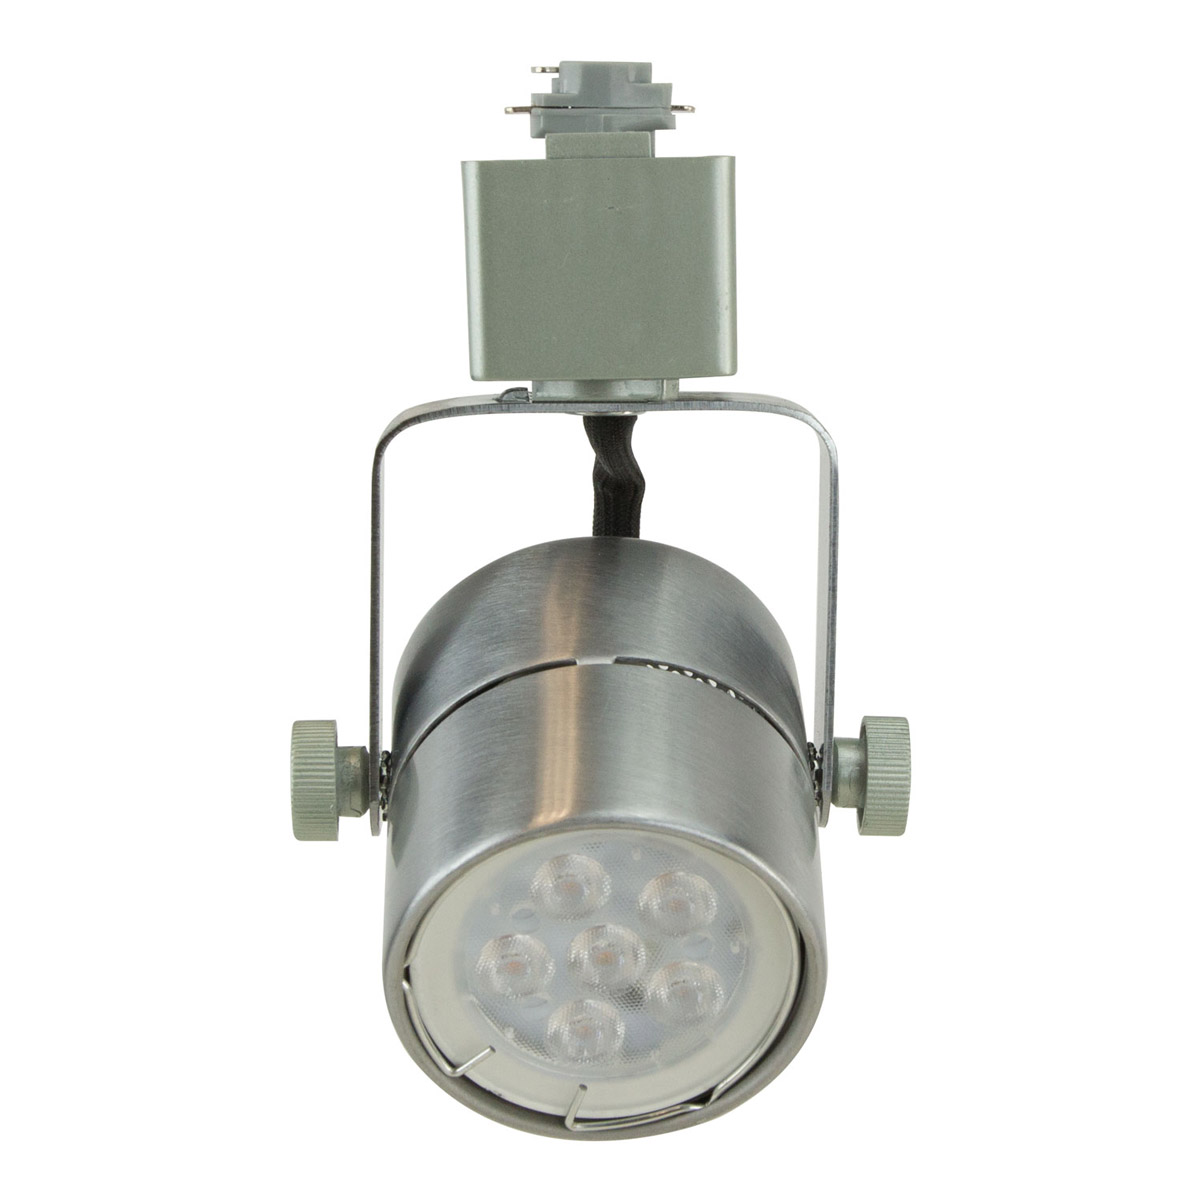 Silver Cylindrical Outdoor Fixed Wall Down Light 240V 50W GU10 Halogen 